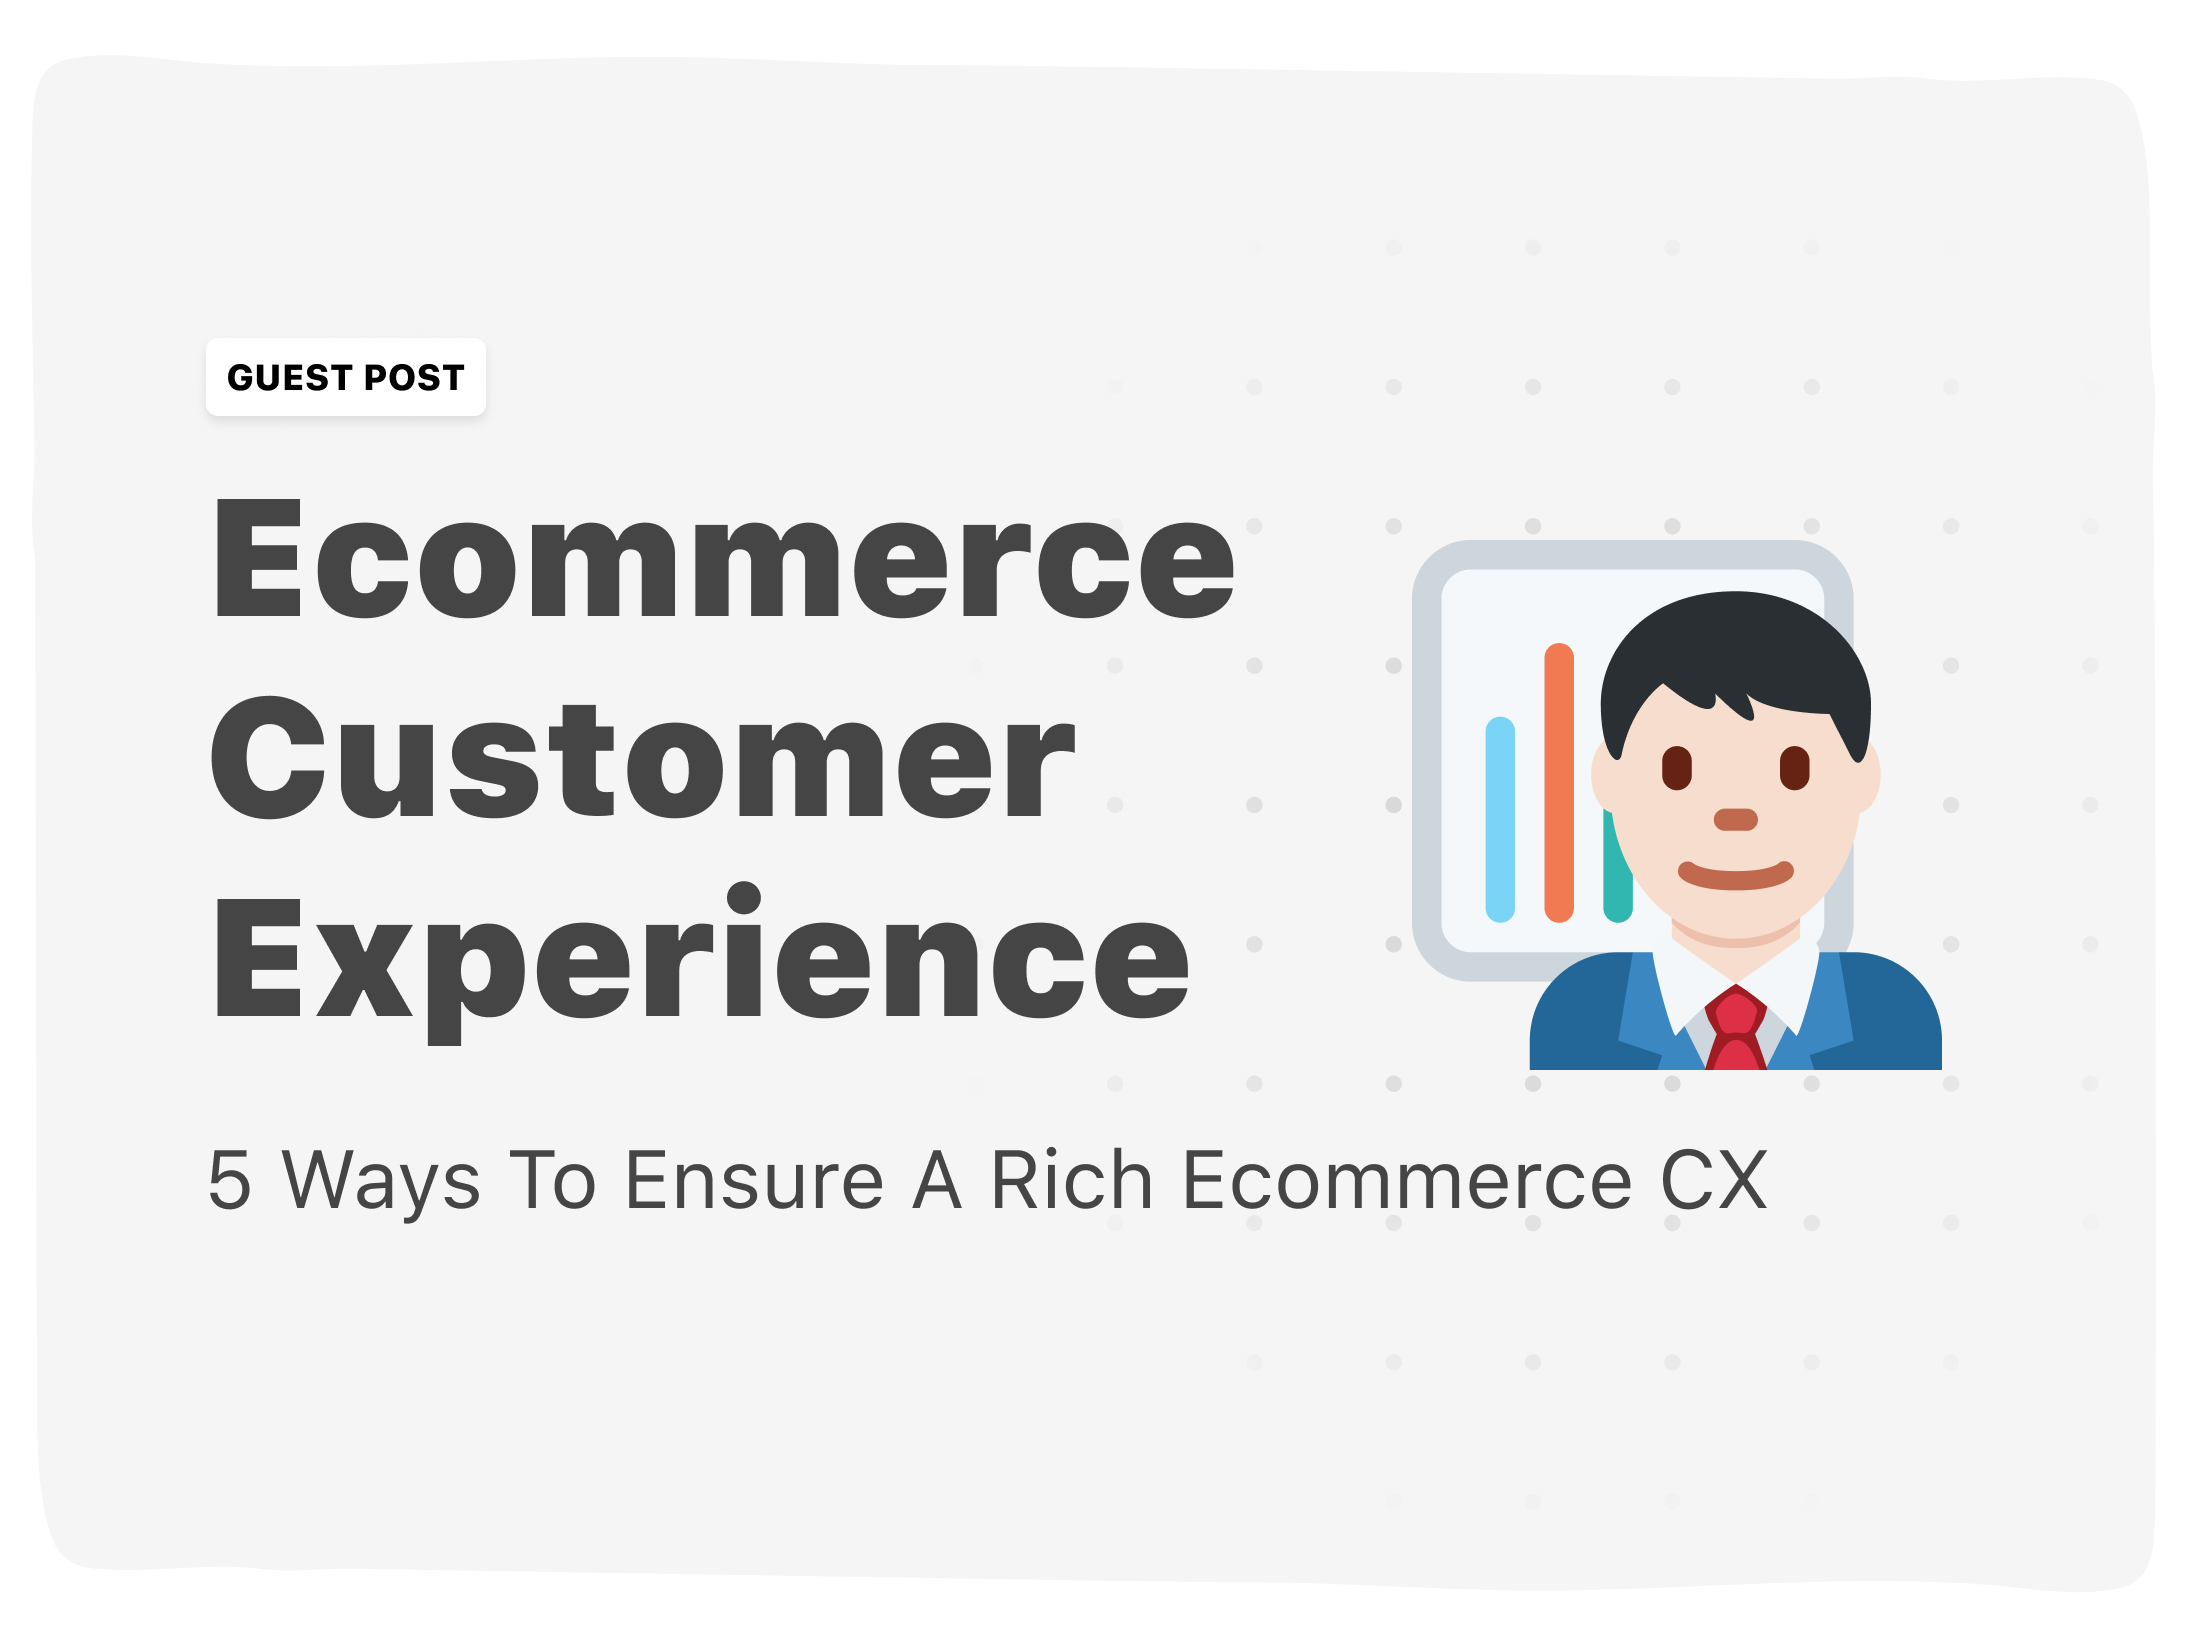 5 Ways To Ensure A Rich Ecommerce Customer Experience (CX)